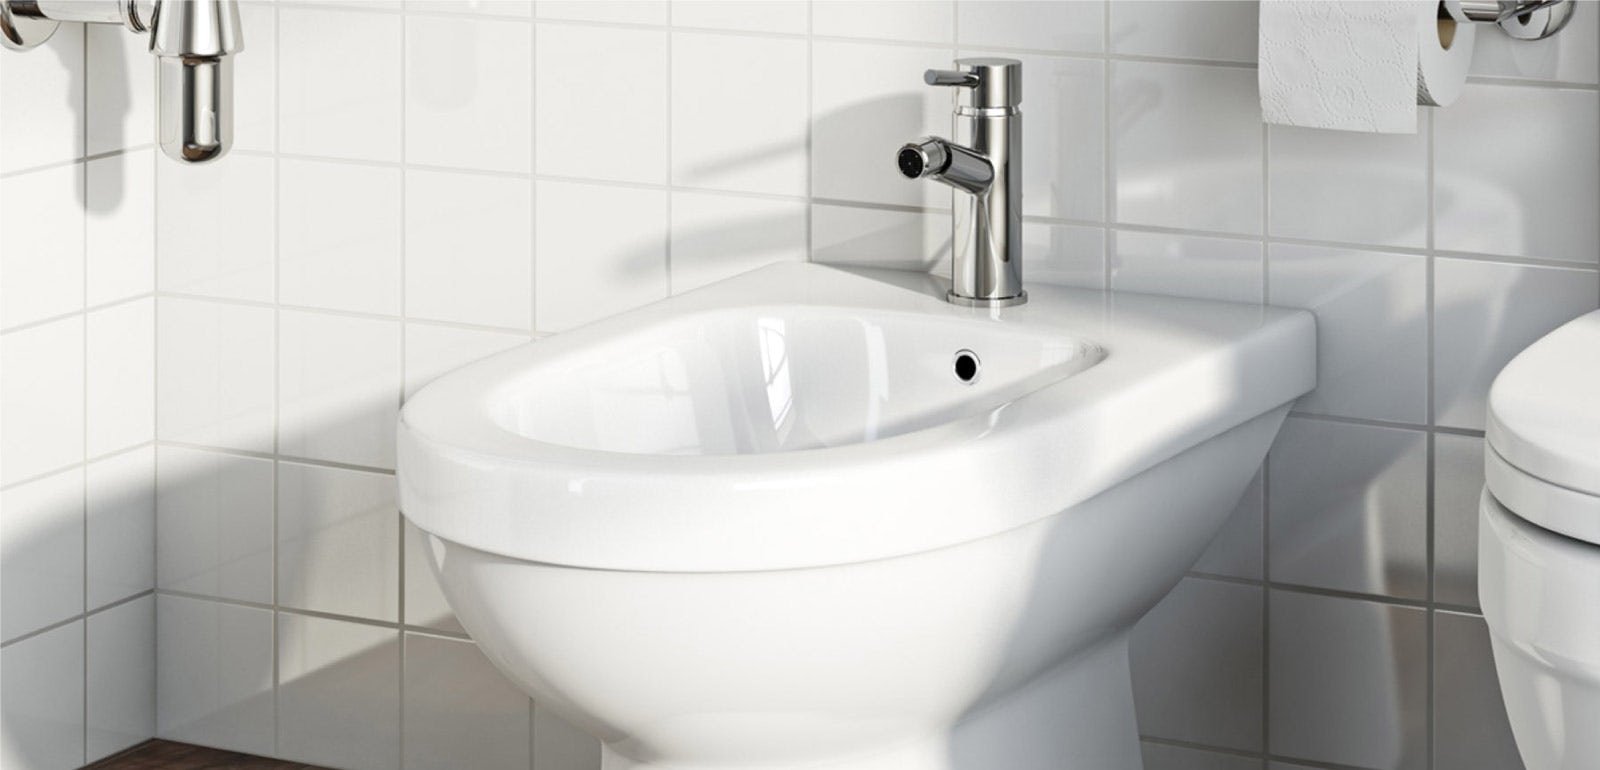 Toilet Bidet Installation And Repair - Wrench It Up Plumbers